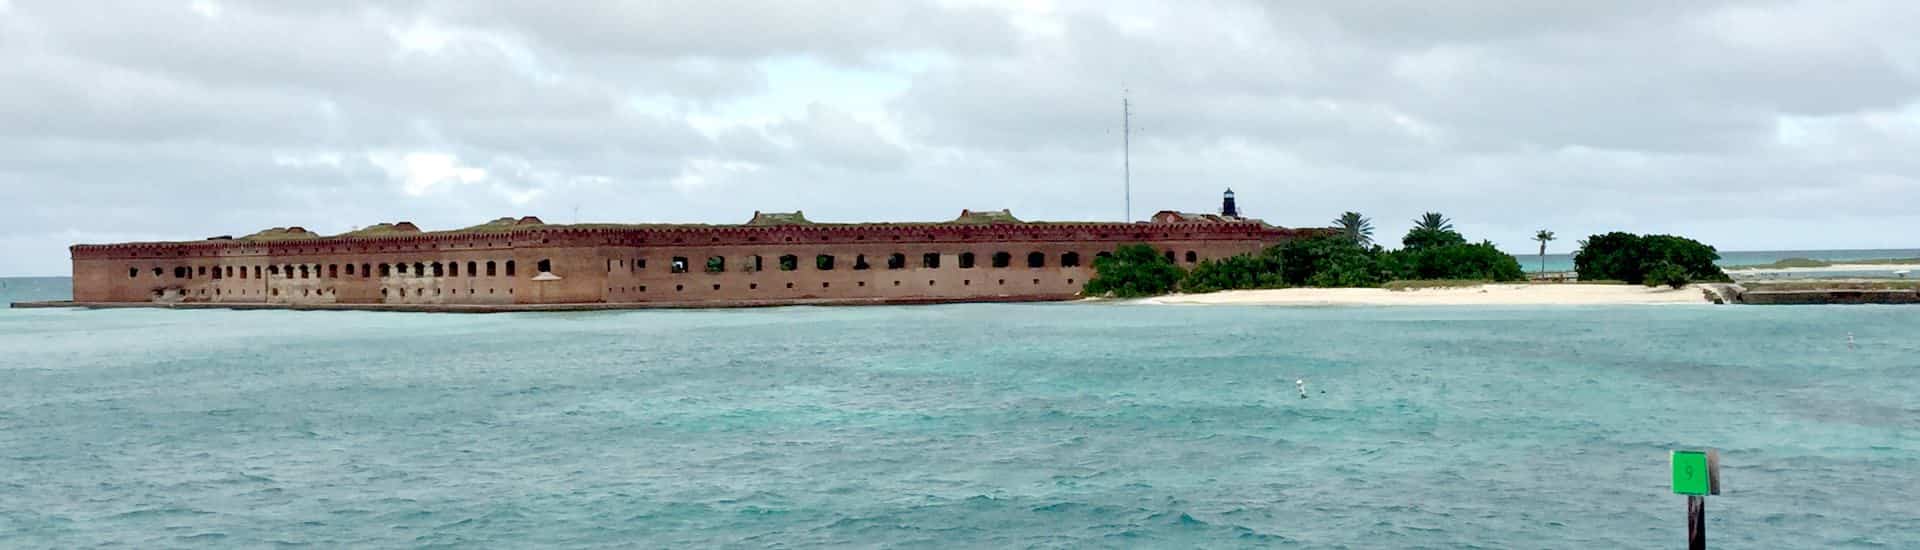 View of an old fort surrounded by water